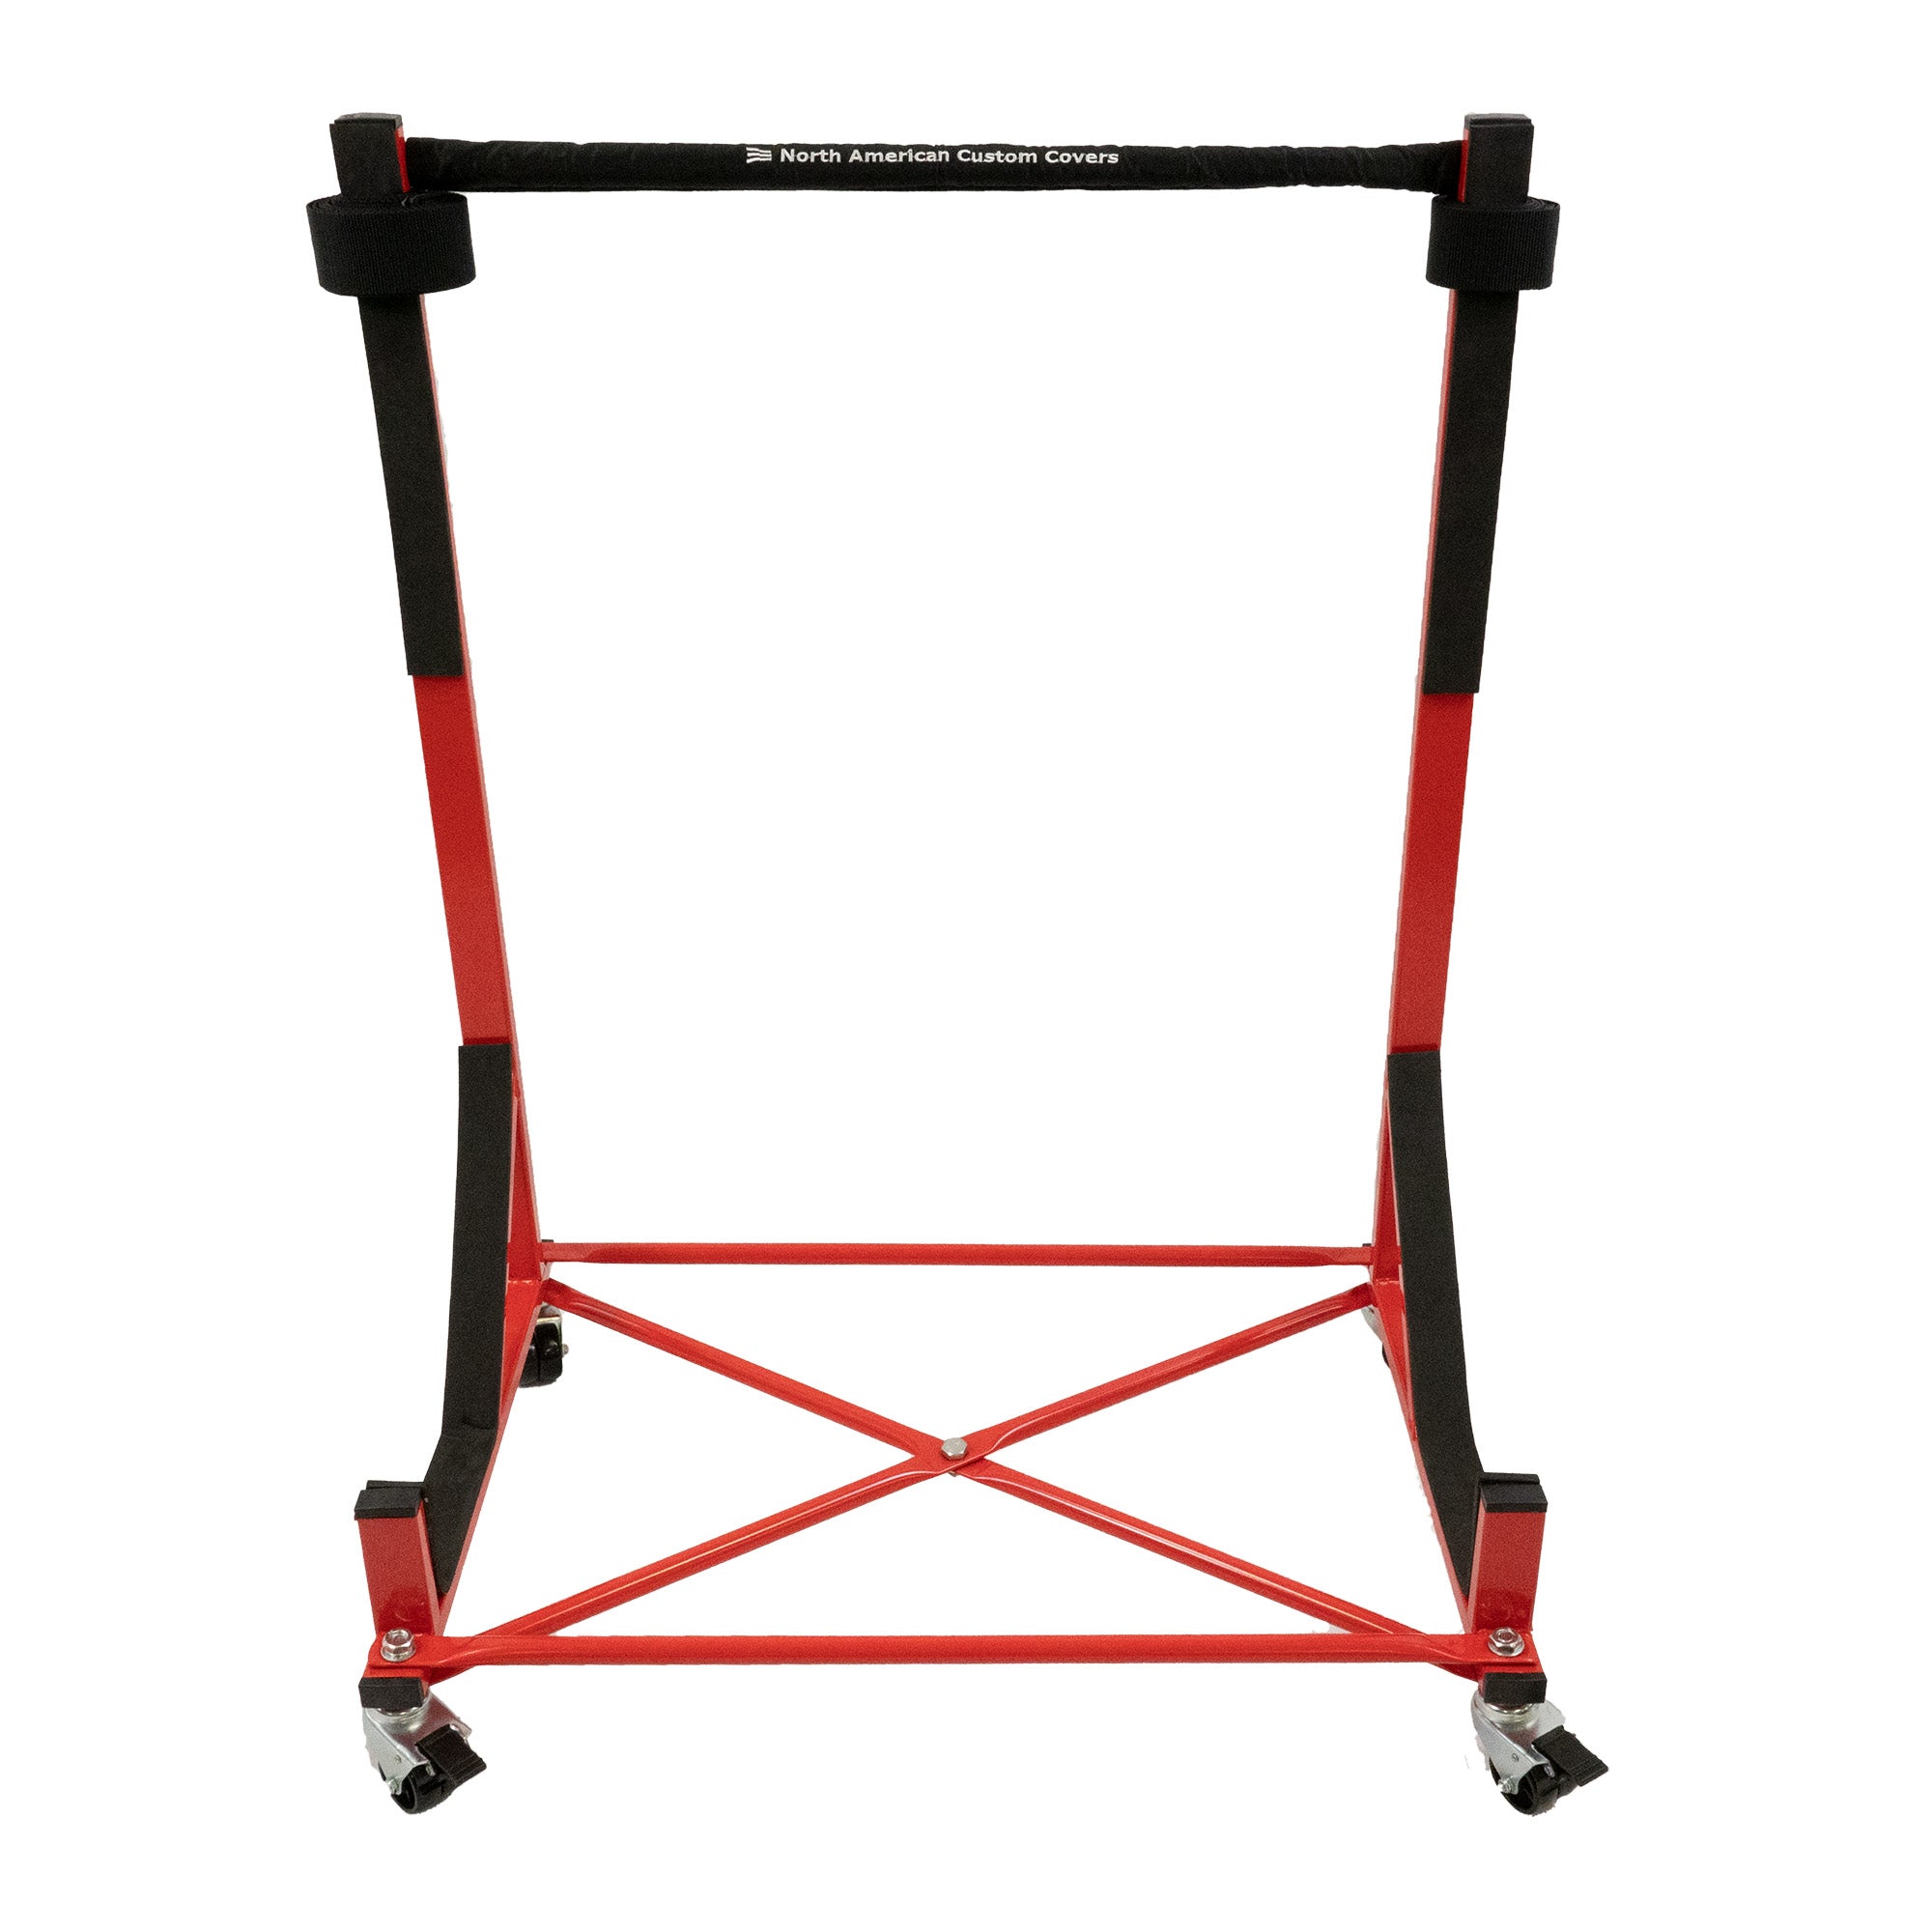 Porsche Boxster 986 Heavy-duty Hardtop Stand Trolley Cart Rack (Red) with Securing Harness and Hard Top Dust Cover (050R)